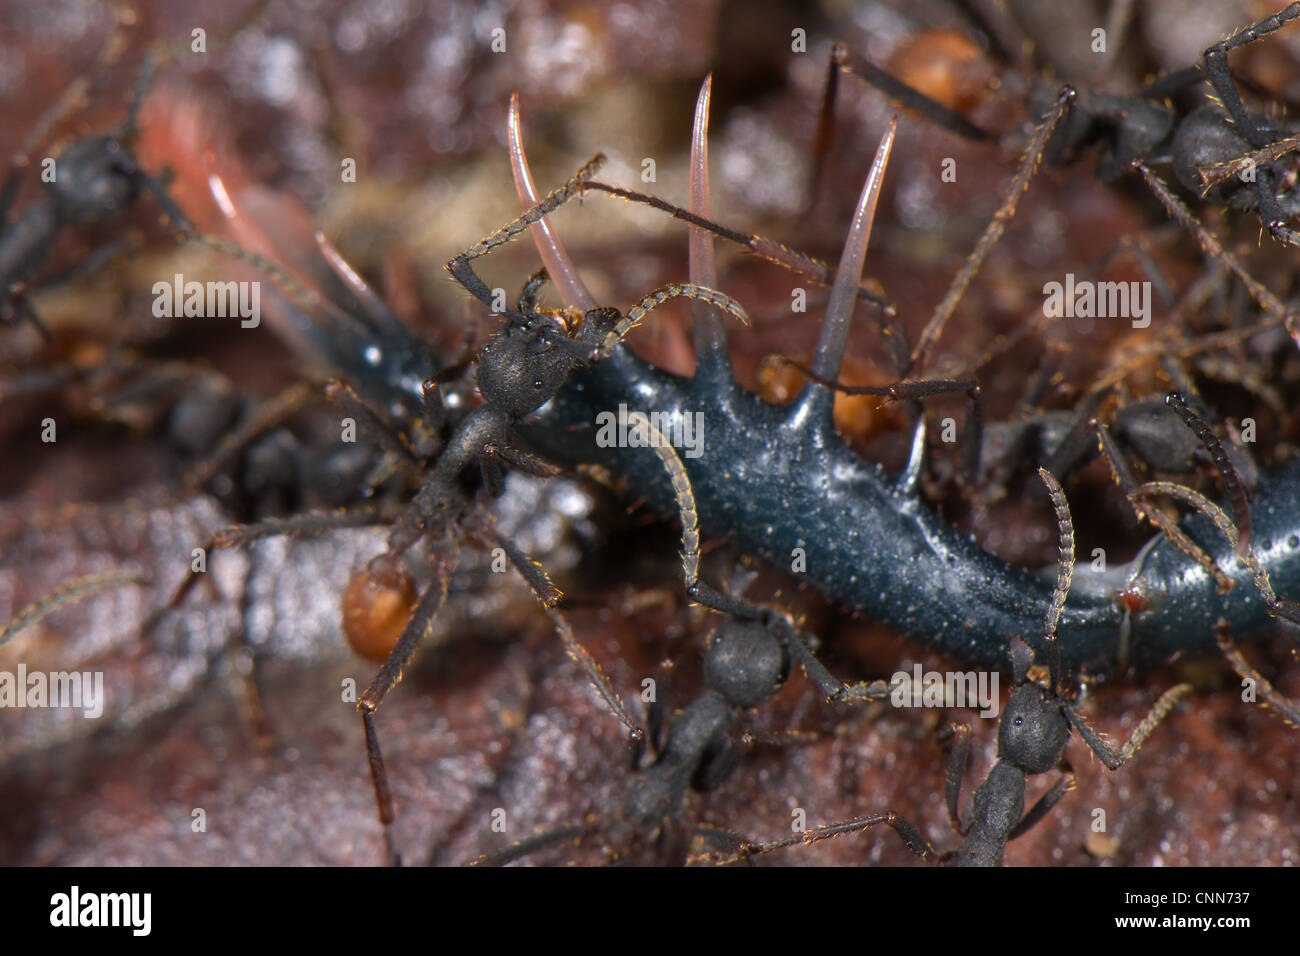 Army Ant Eciton burchellii adult workers group preying Tailless Whip Scorpion Amblypygi sp. Los Amigos Biological Station Madre Stock Photo